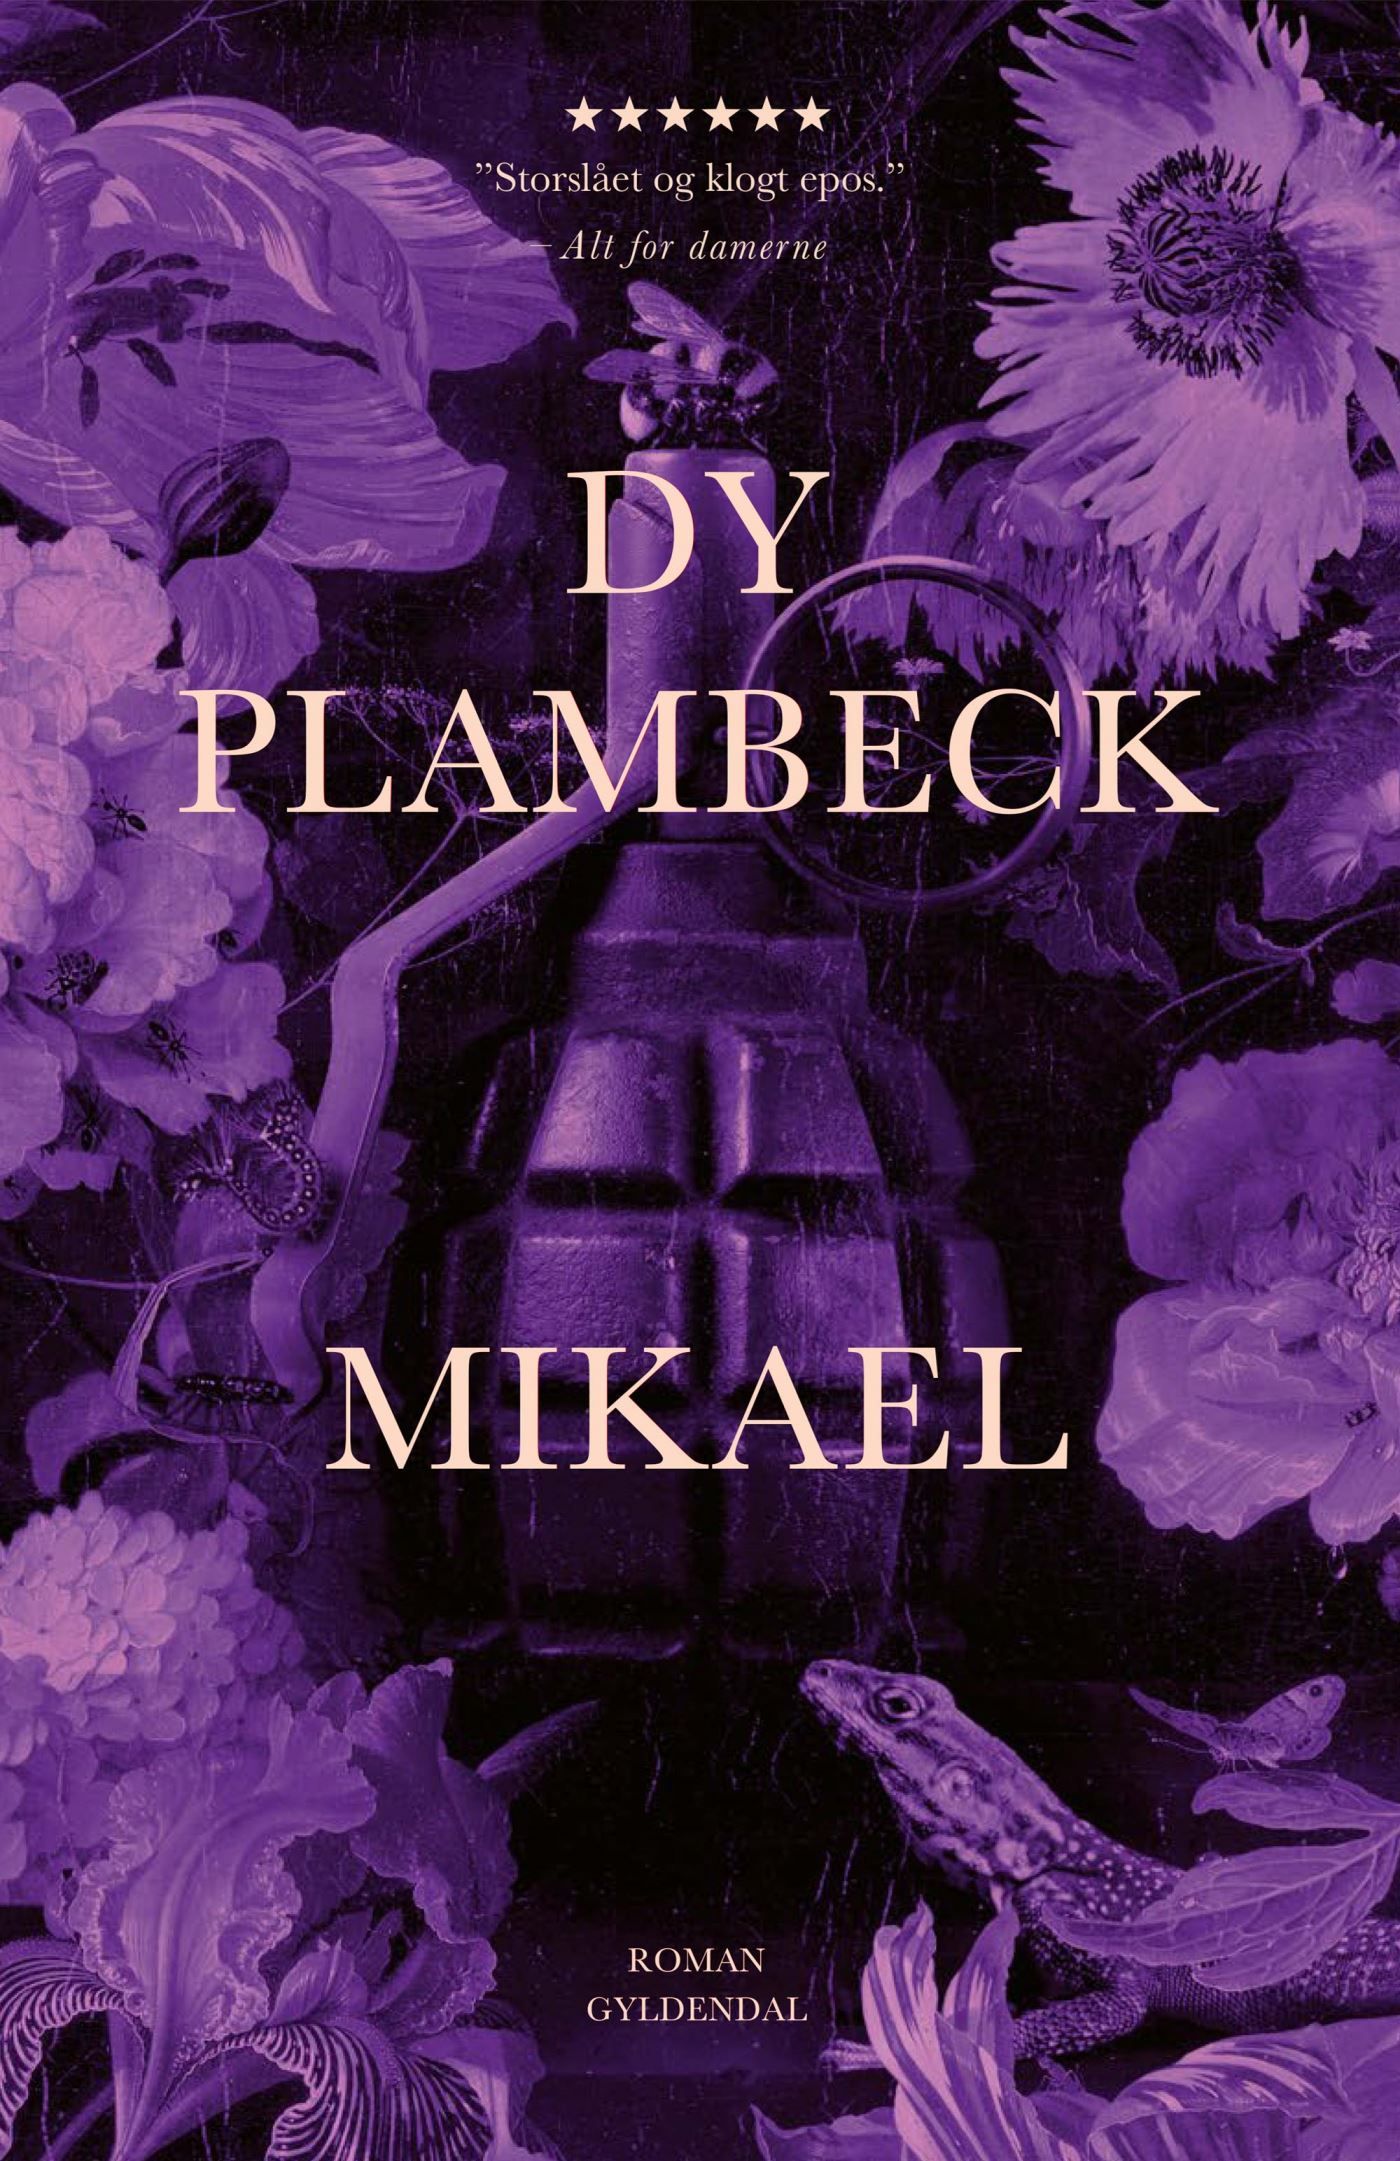 Mikael, audiobook by Dy Plambeck